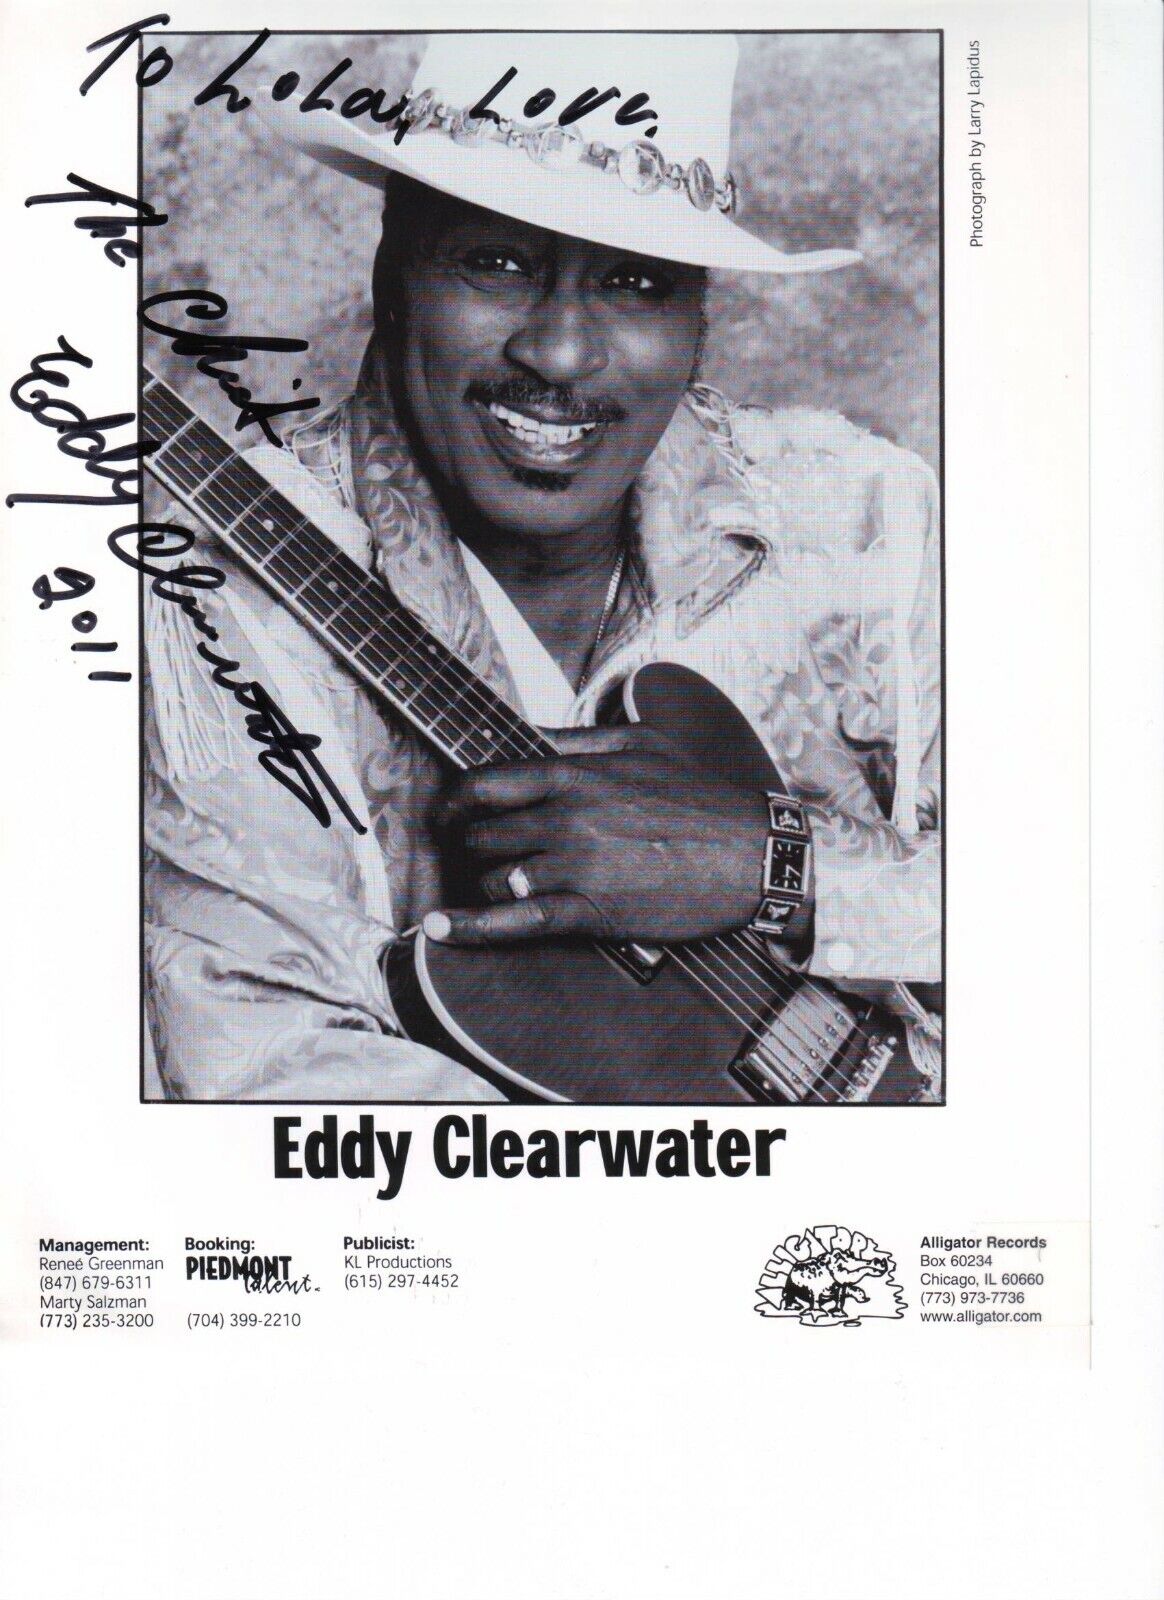 Eddy Clearwater (20x25 cm) Original Autographed Photo Poster painting